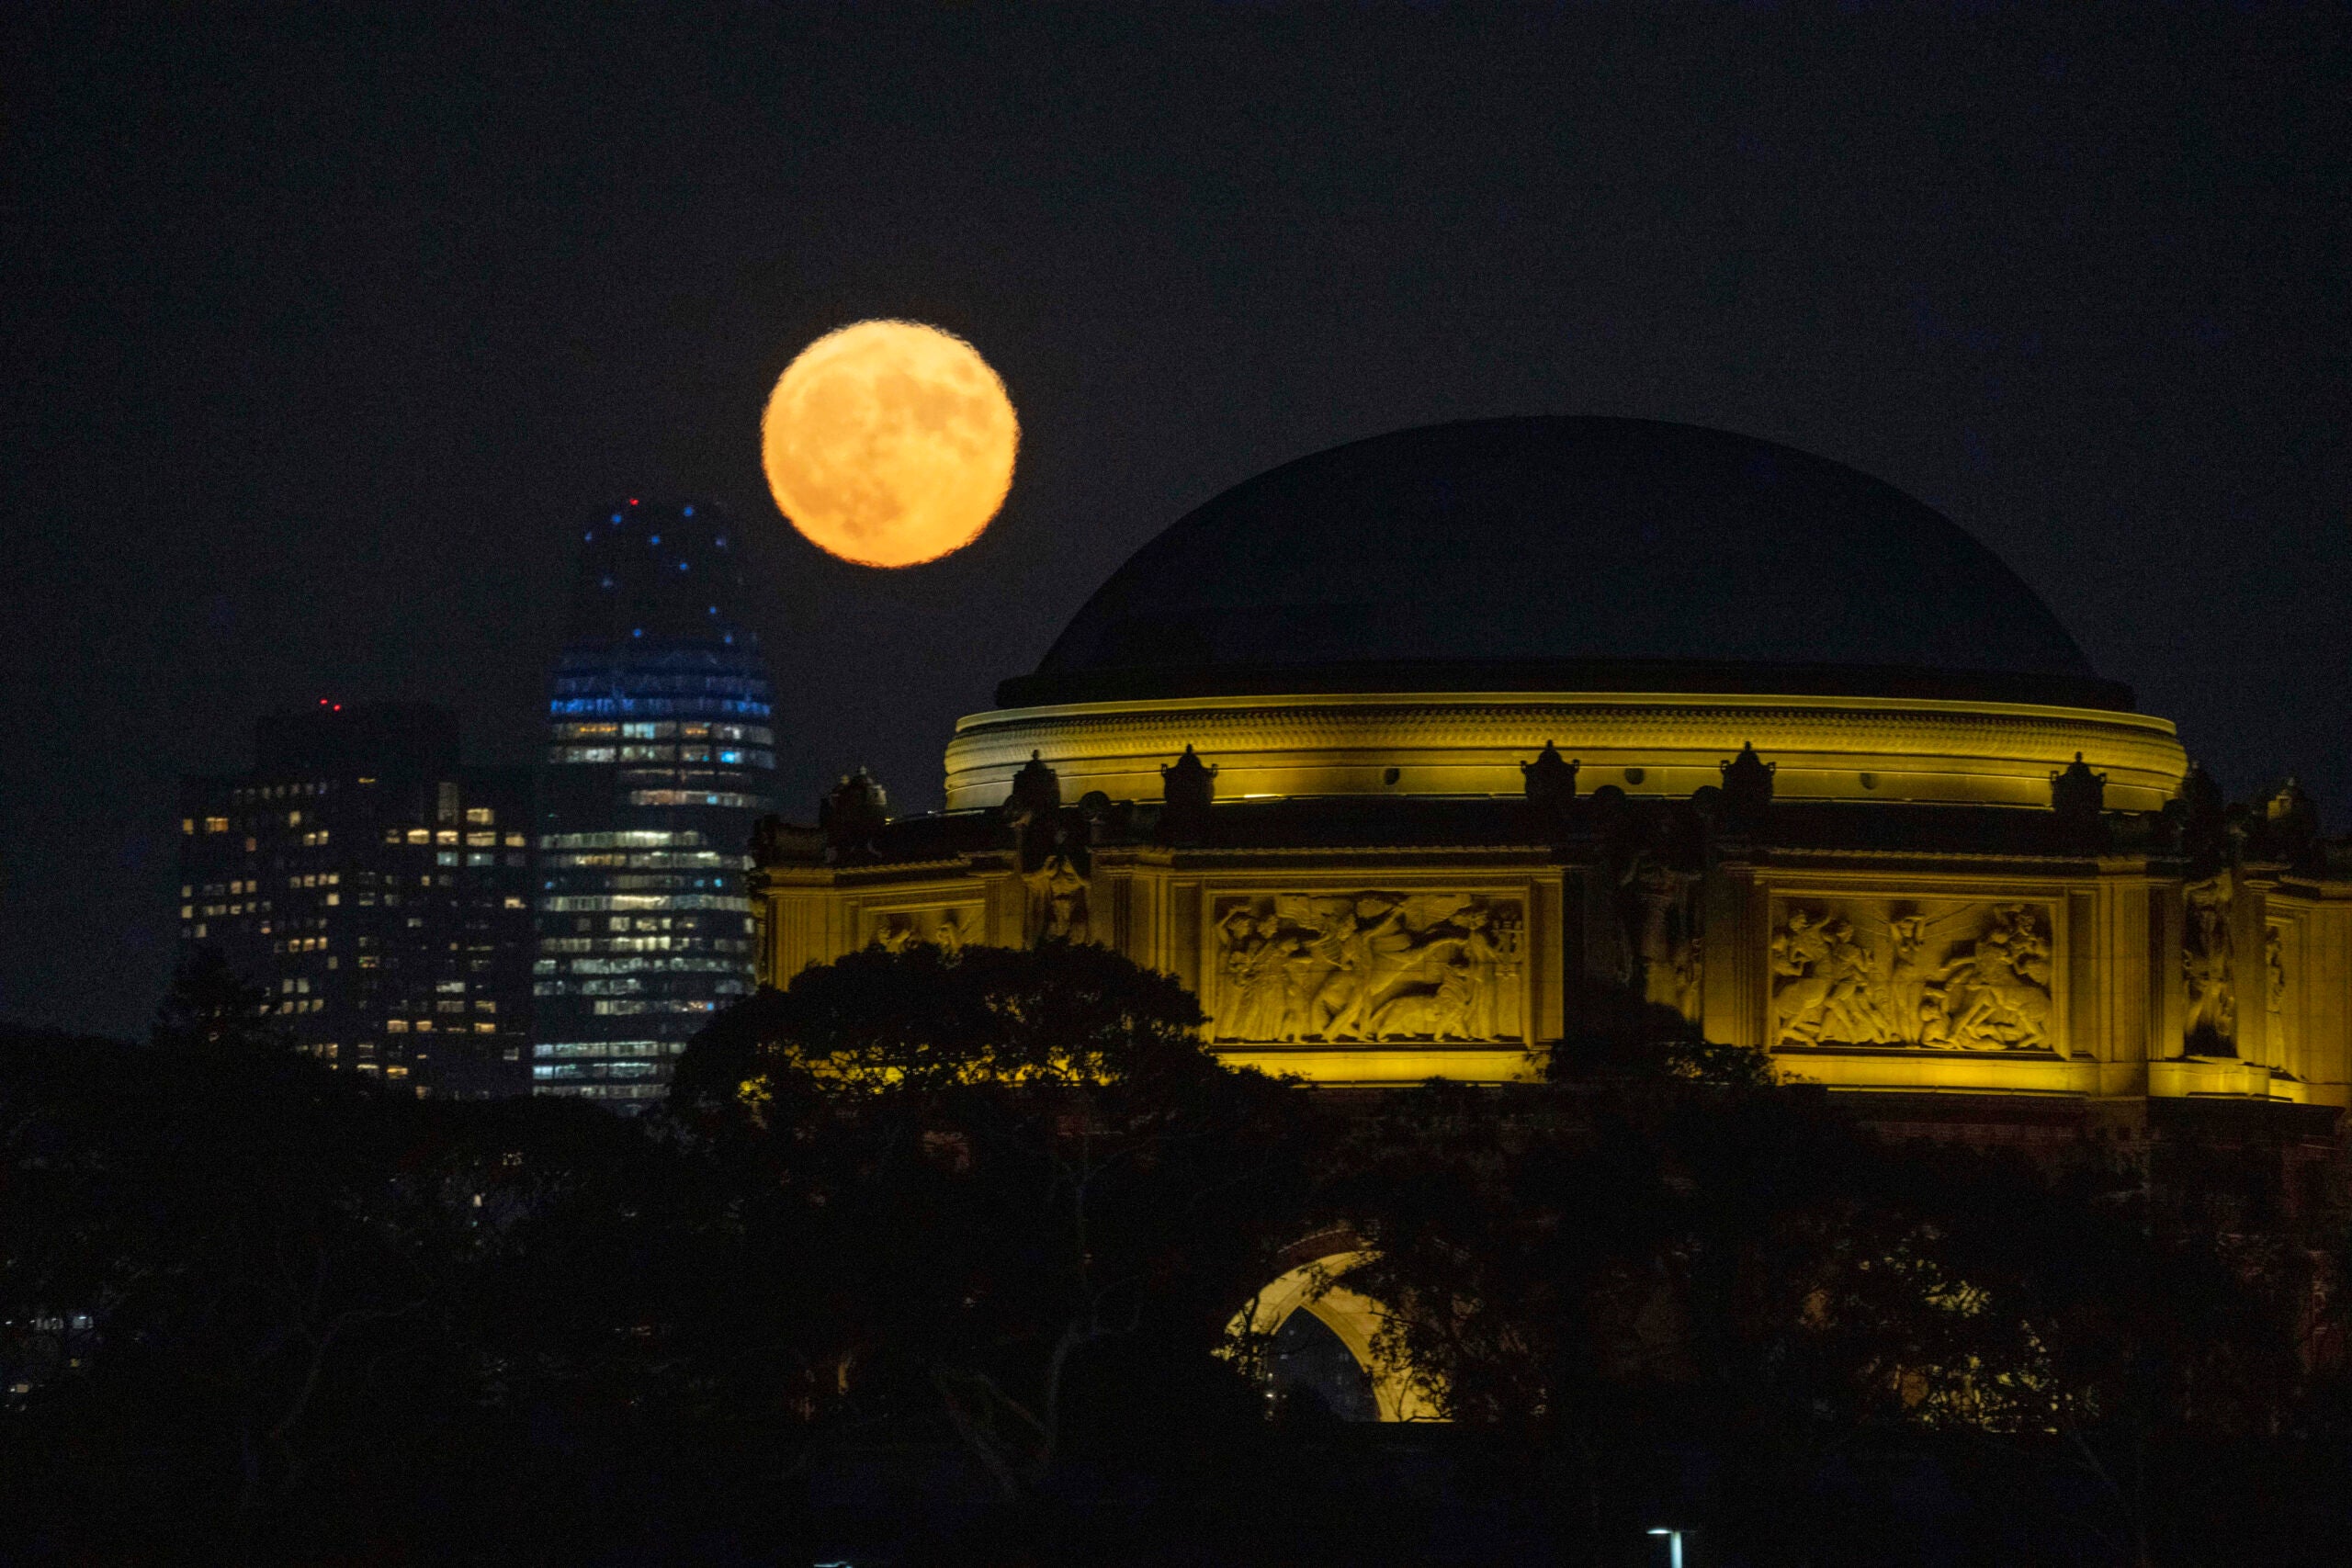 A blue supermoon rises between the Salesforce Tower and the Palace of Fine Arts in San Francisco.